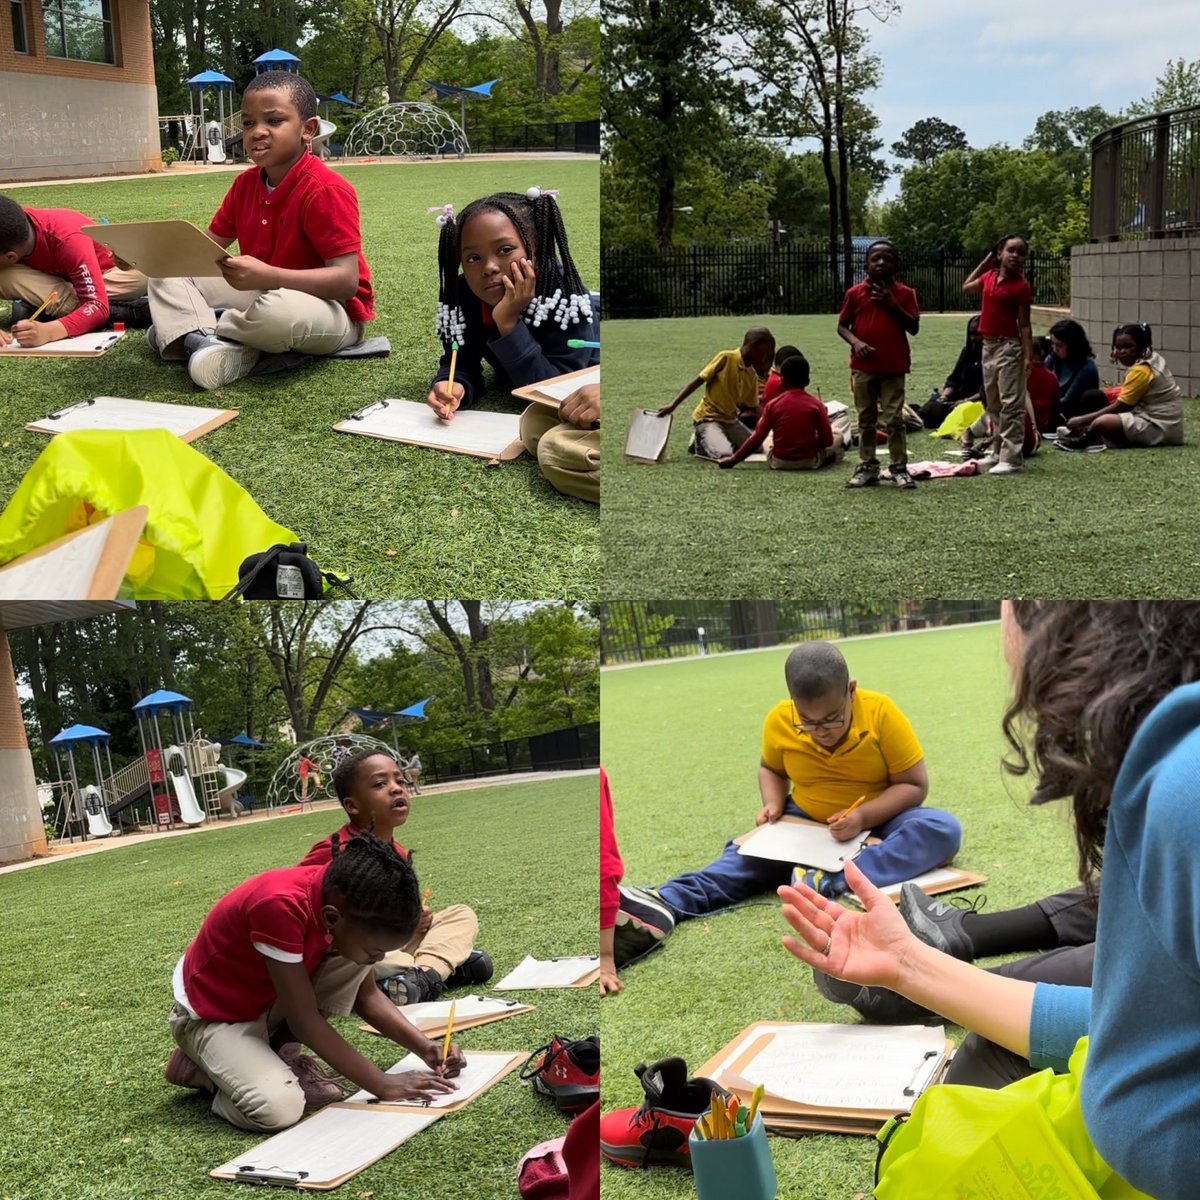 What better way to learn about the world then sitting outside on a warm day!

Every space is a learning space.

#education #alwayslearning #socialstudies #learningoutside #learningspaces #educationforall